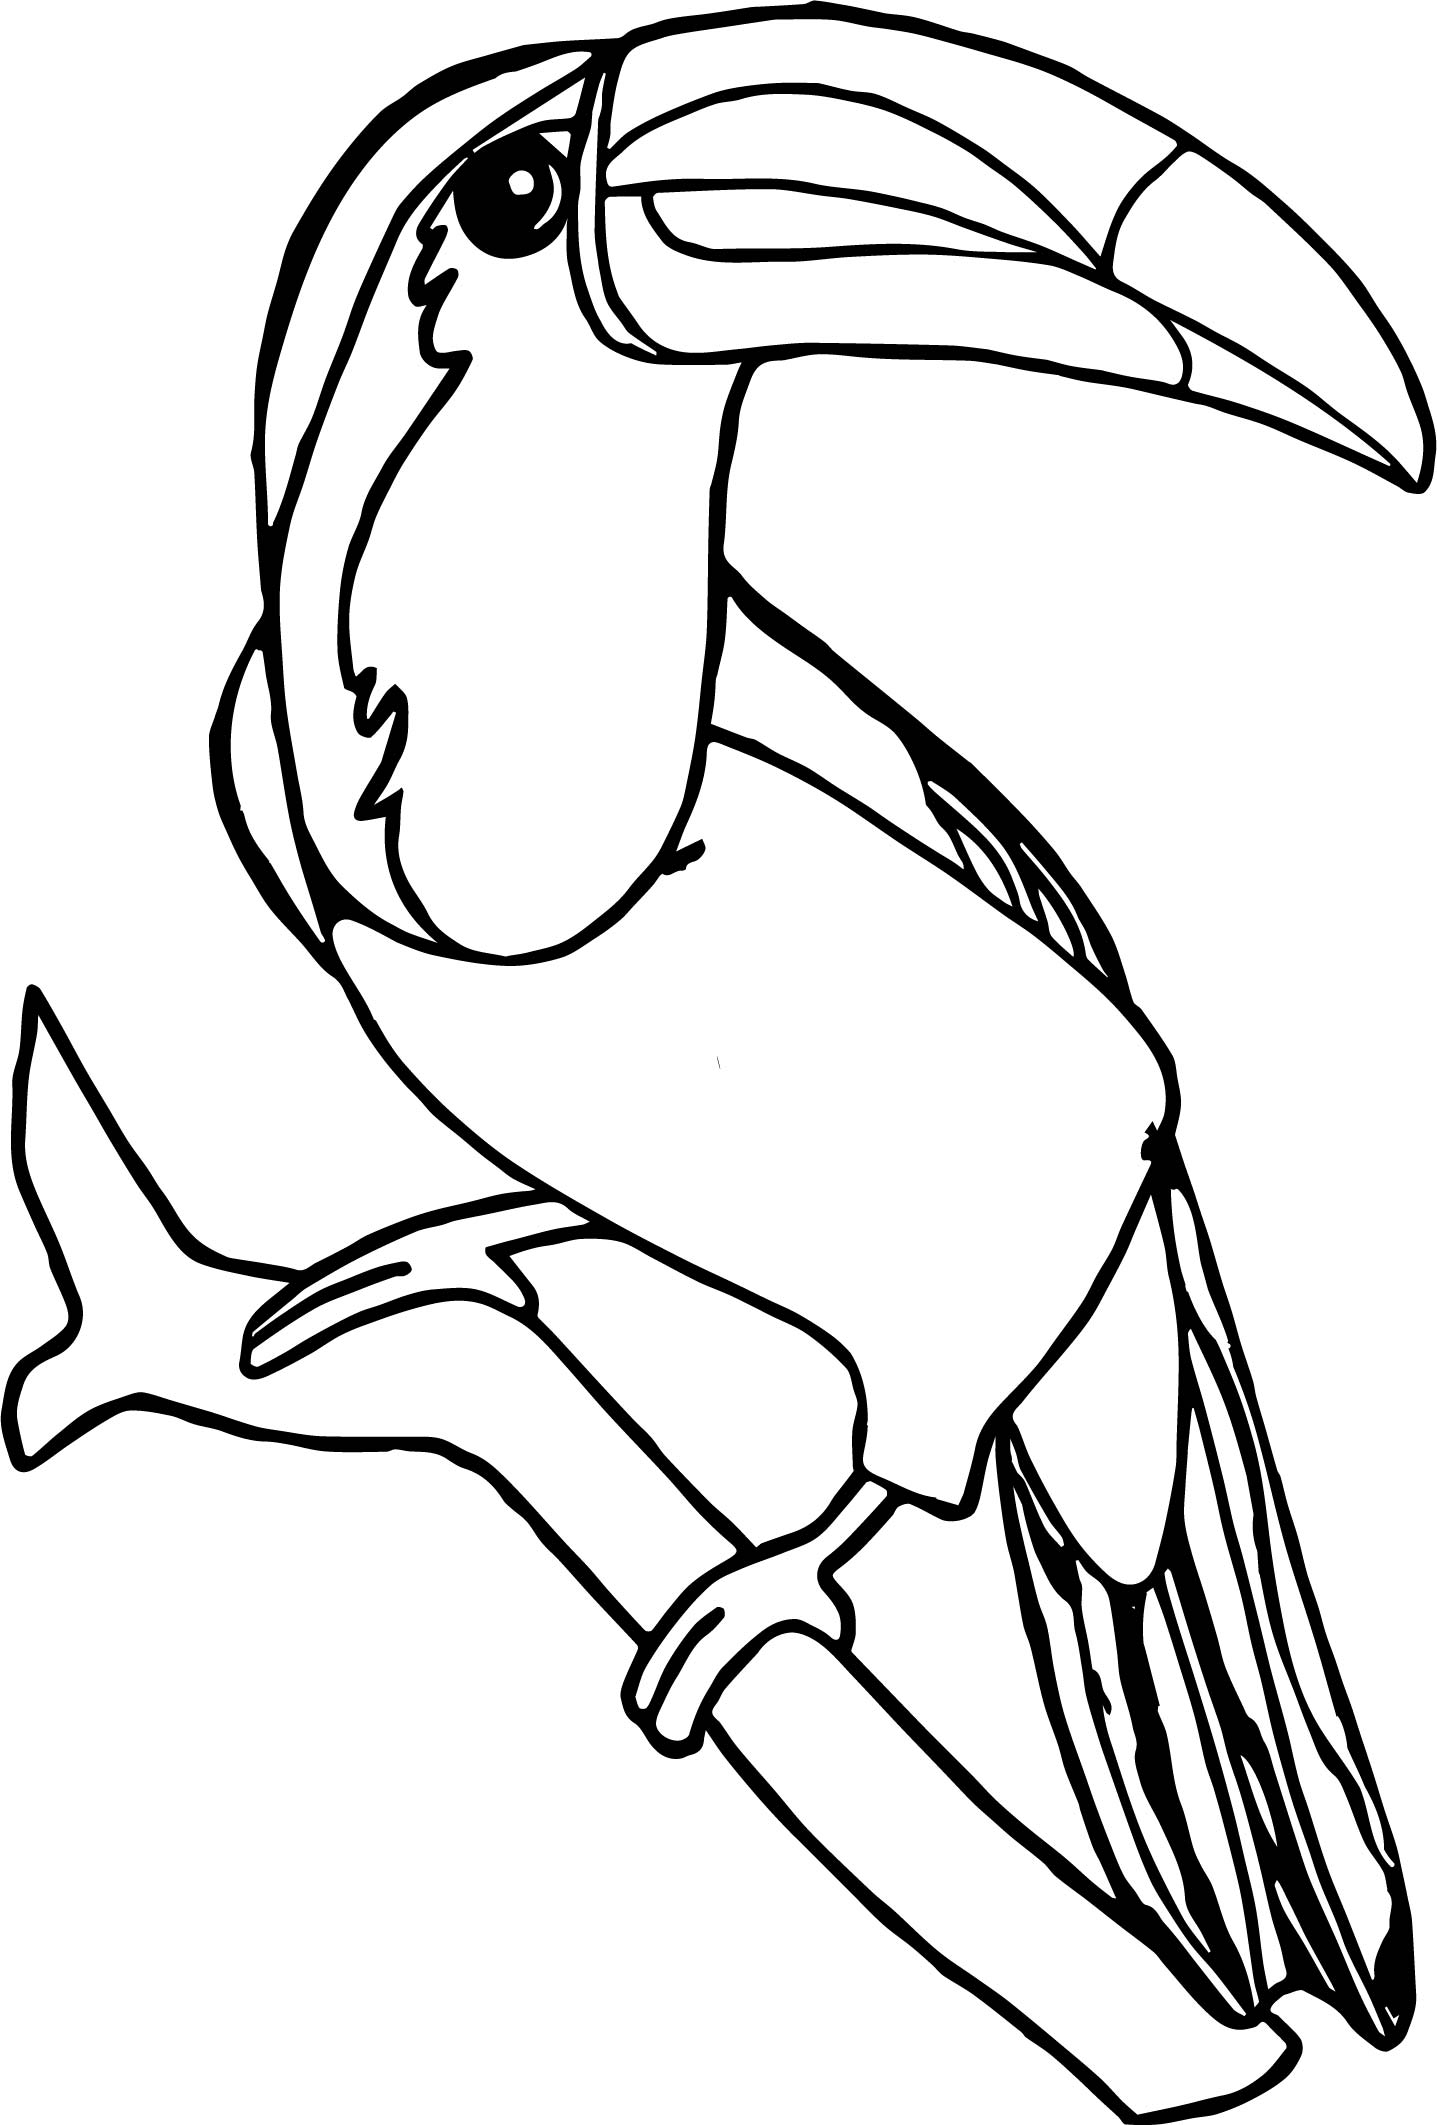 toucan-bird-coloring-pages-at-getcolorings-free-printable